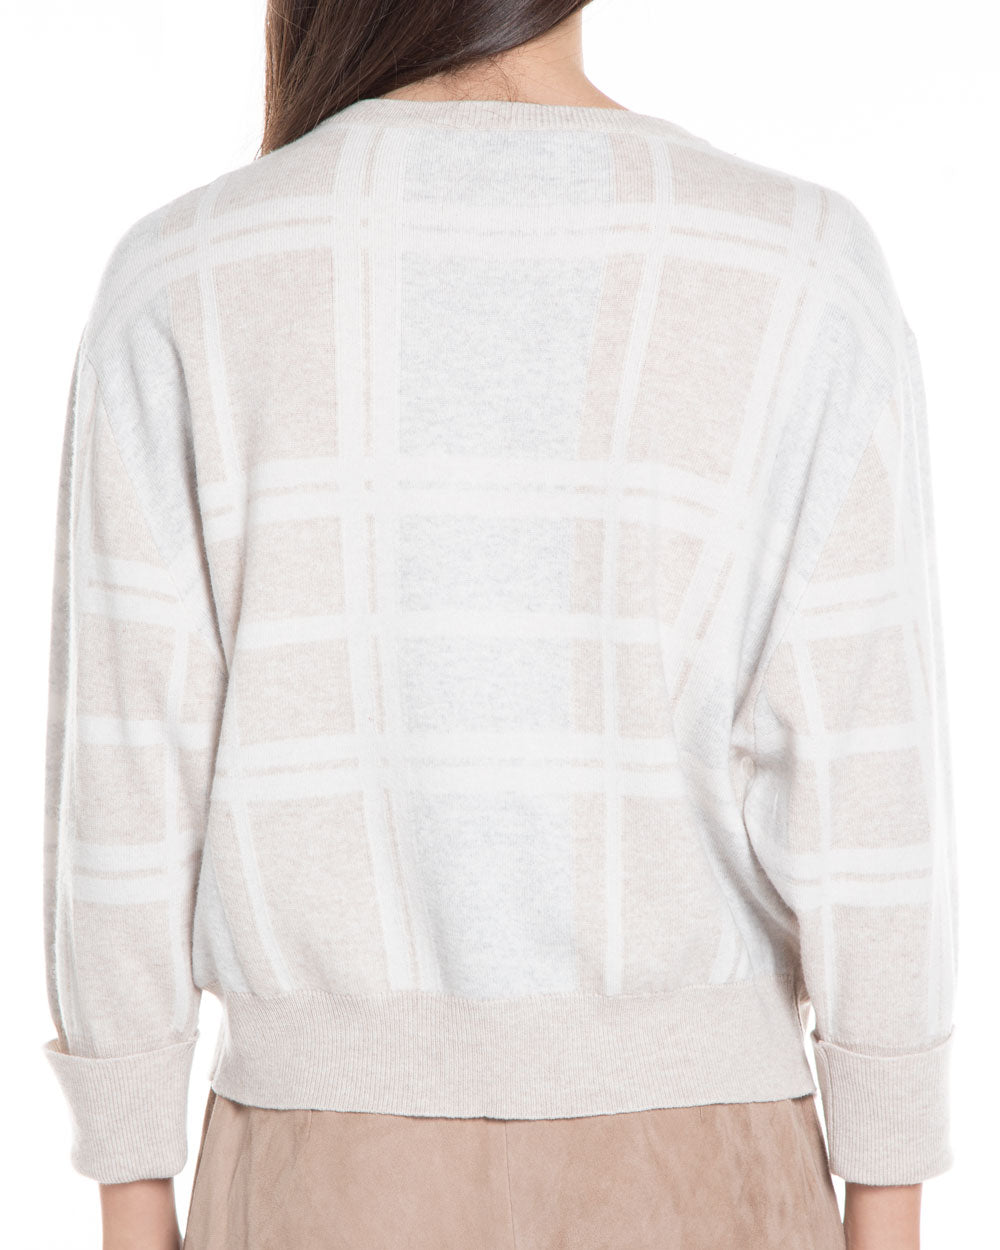 Oyster and Warm White Paillette Plaid Cashmere Blend Sweater